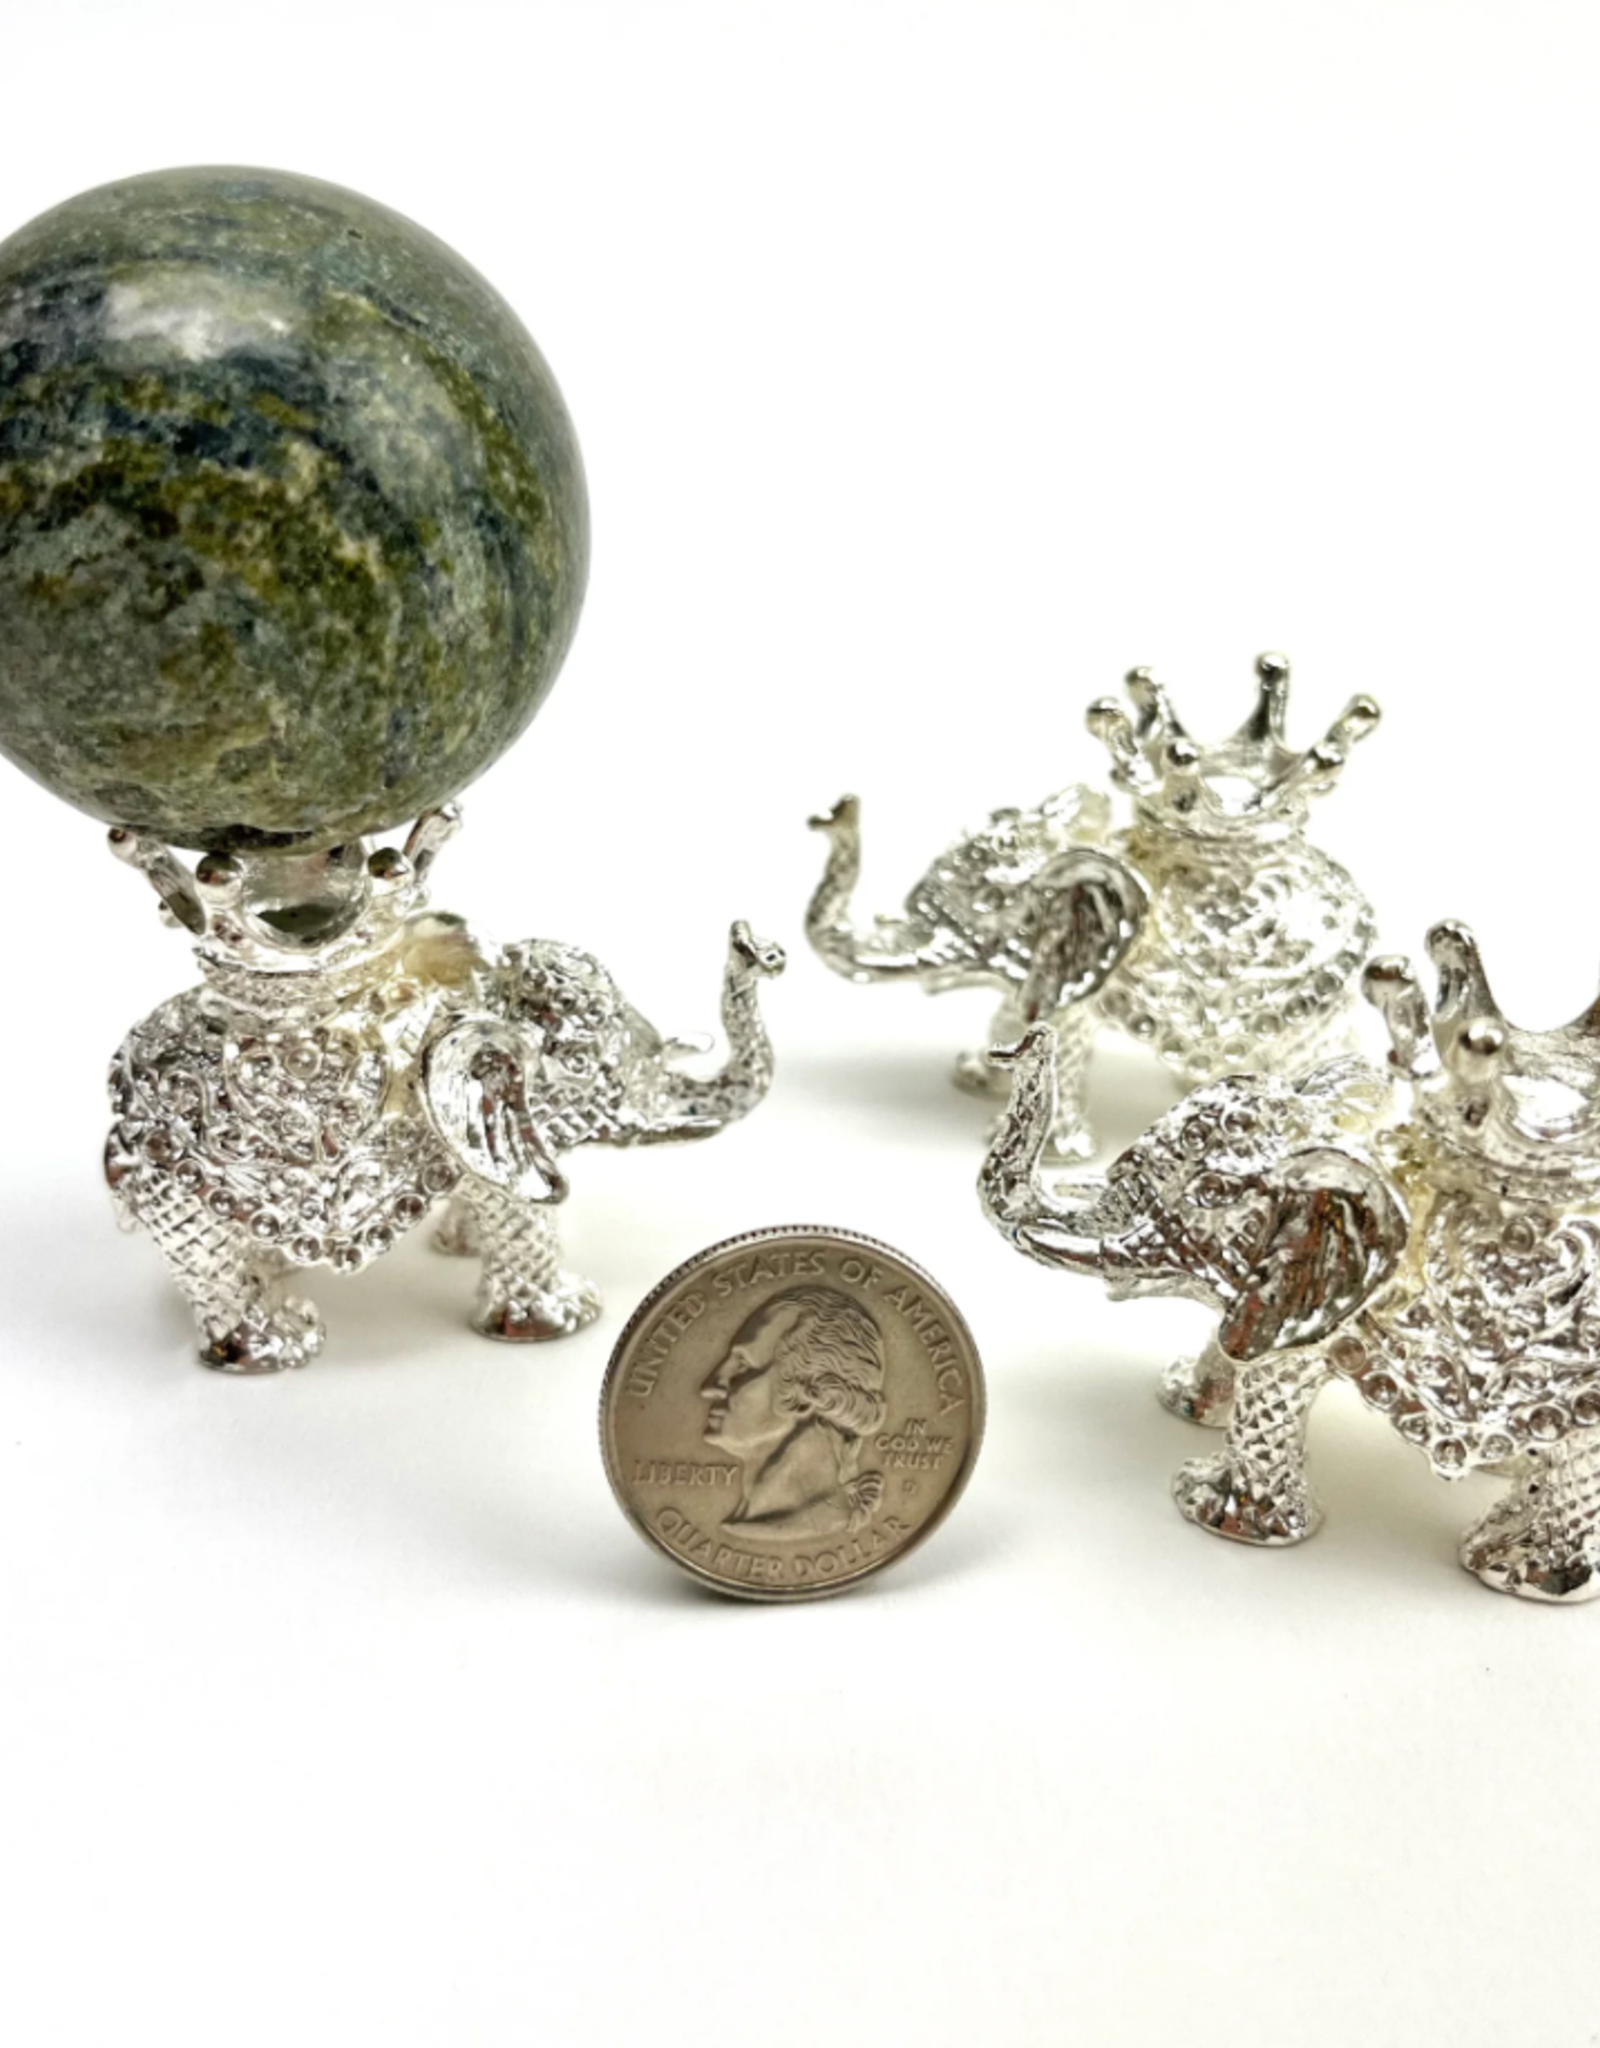 Silver Sphere Stand | 3 Elephants | Small | China